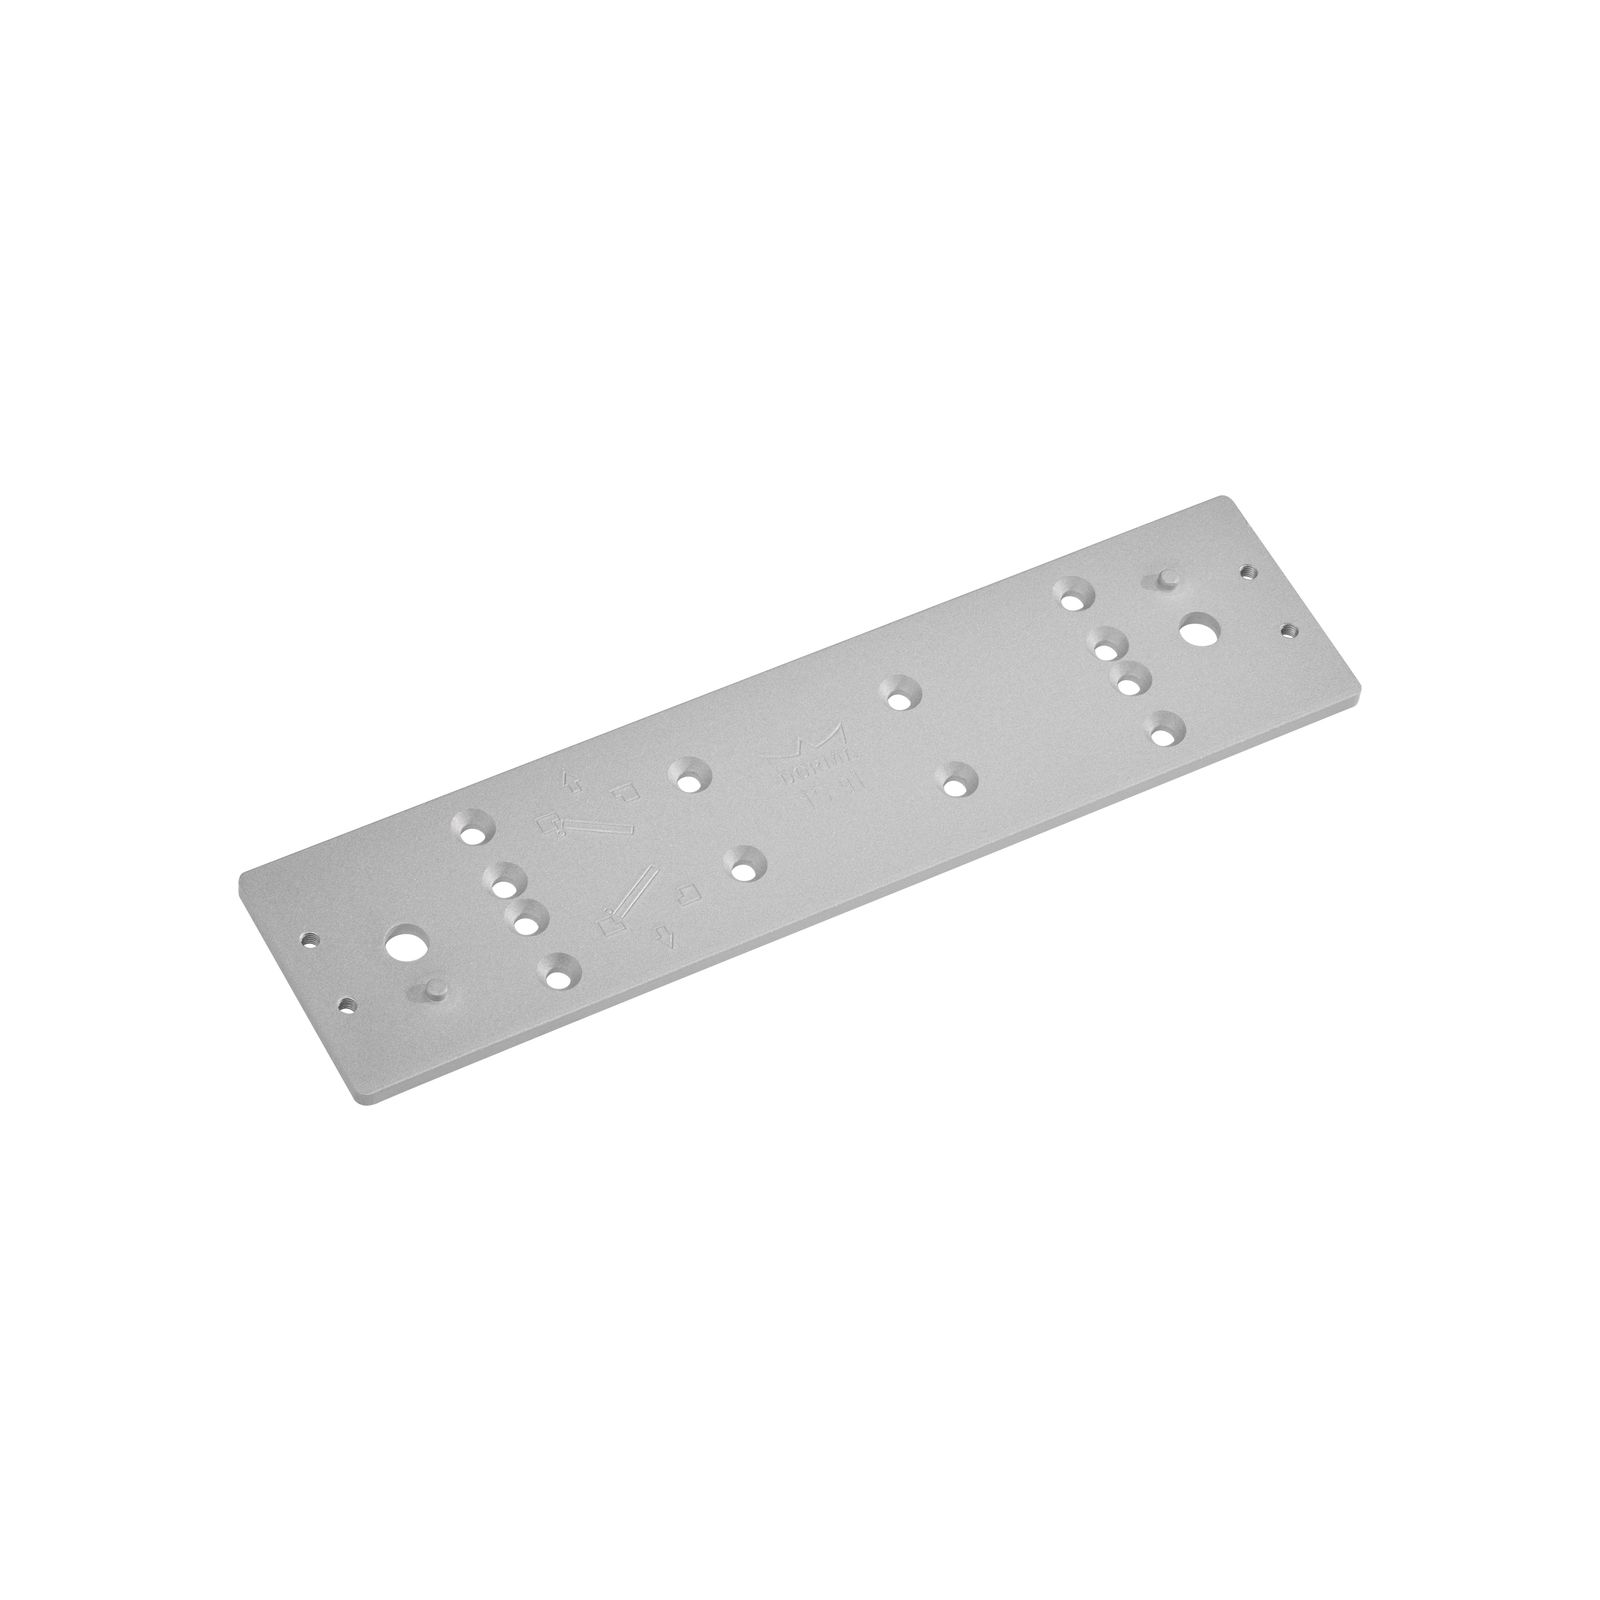 DORMA mounting plate for TS 91 door closer silver